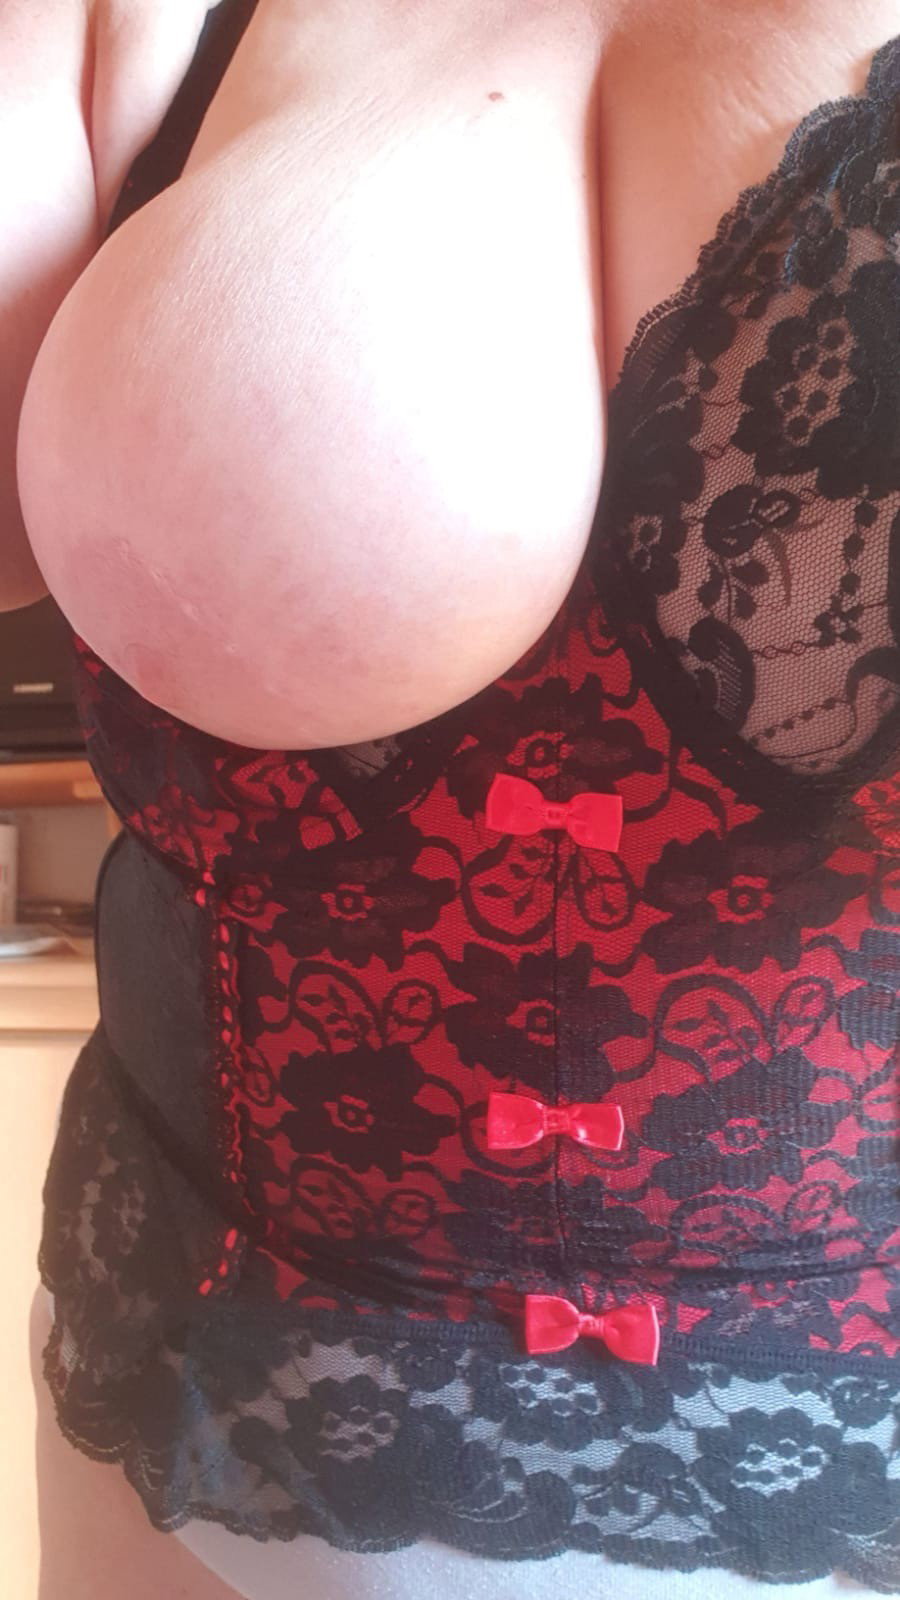 Photo by Swiss64 with the username @Swiss64,  September 3, 2019 at 9:50 AM. The post is about the topic Saggy tits